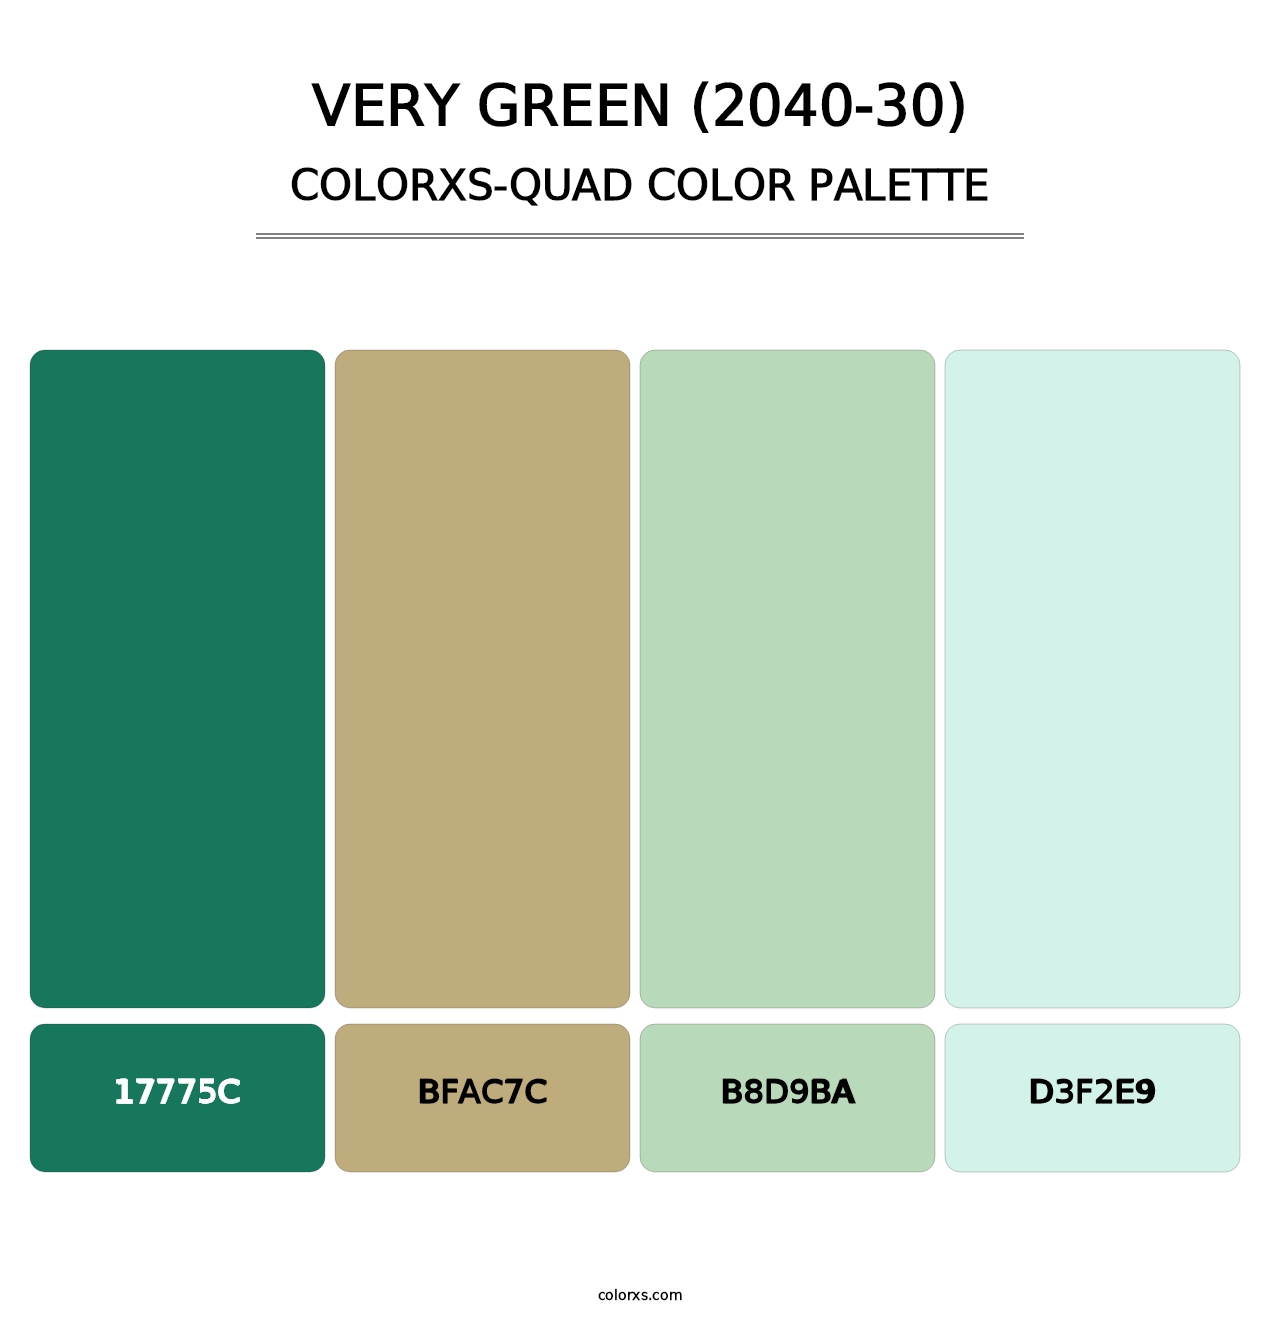 Very Green (2040-30) - Colorxs Quad Palette